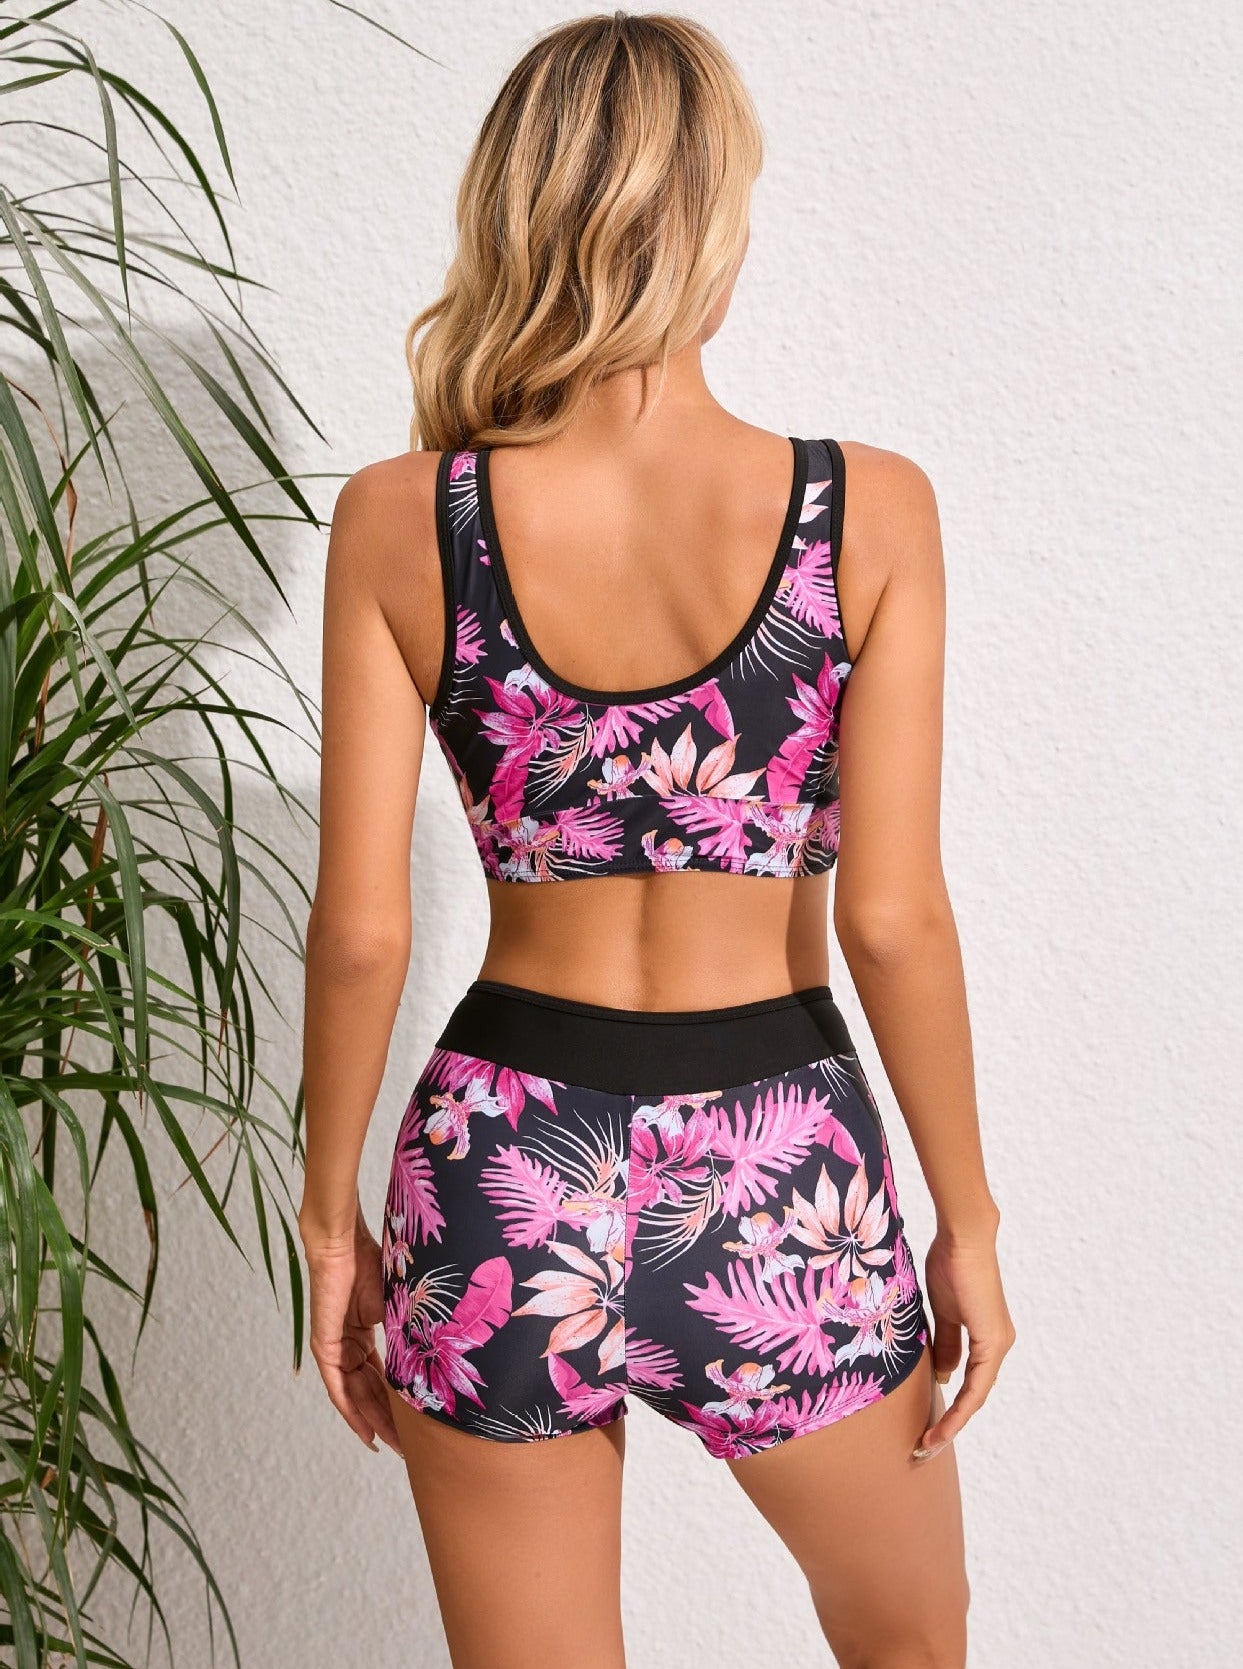 Tropical Printed Two Piece High Waist Conservative Swimsuit